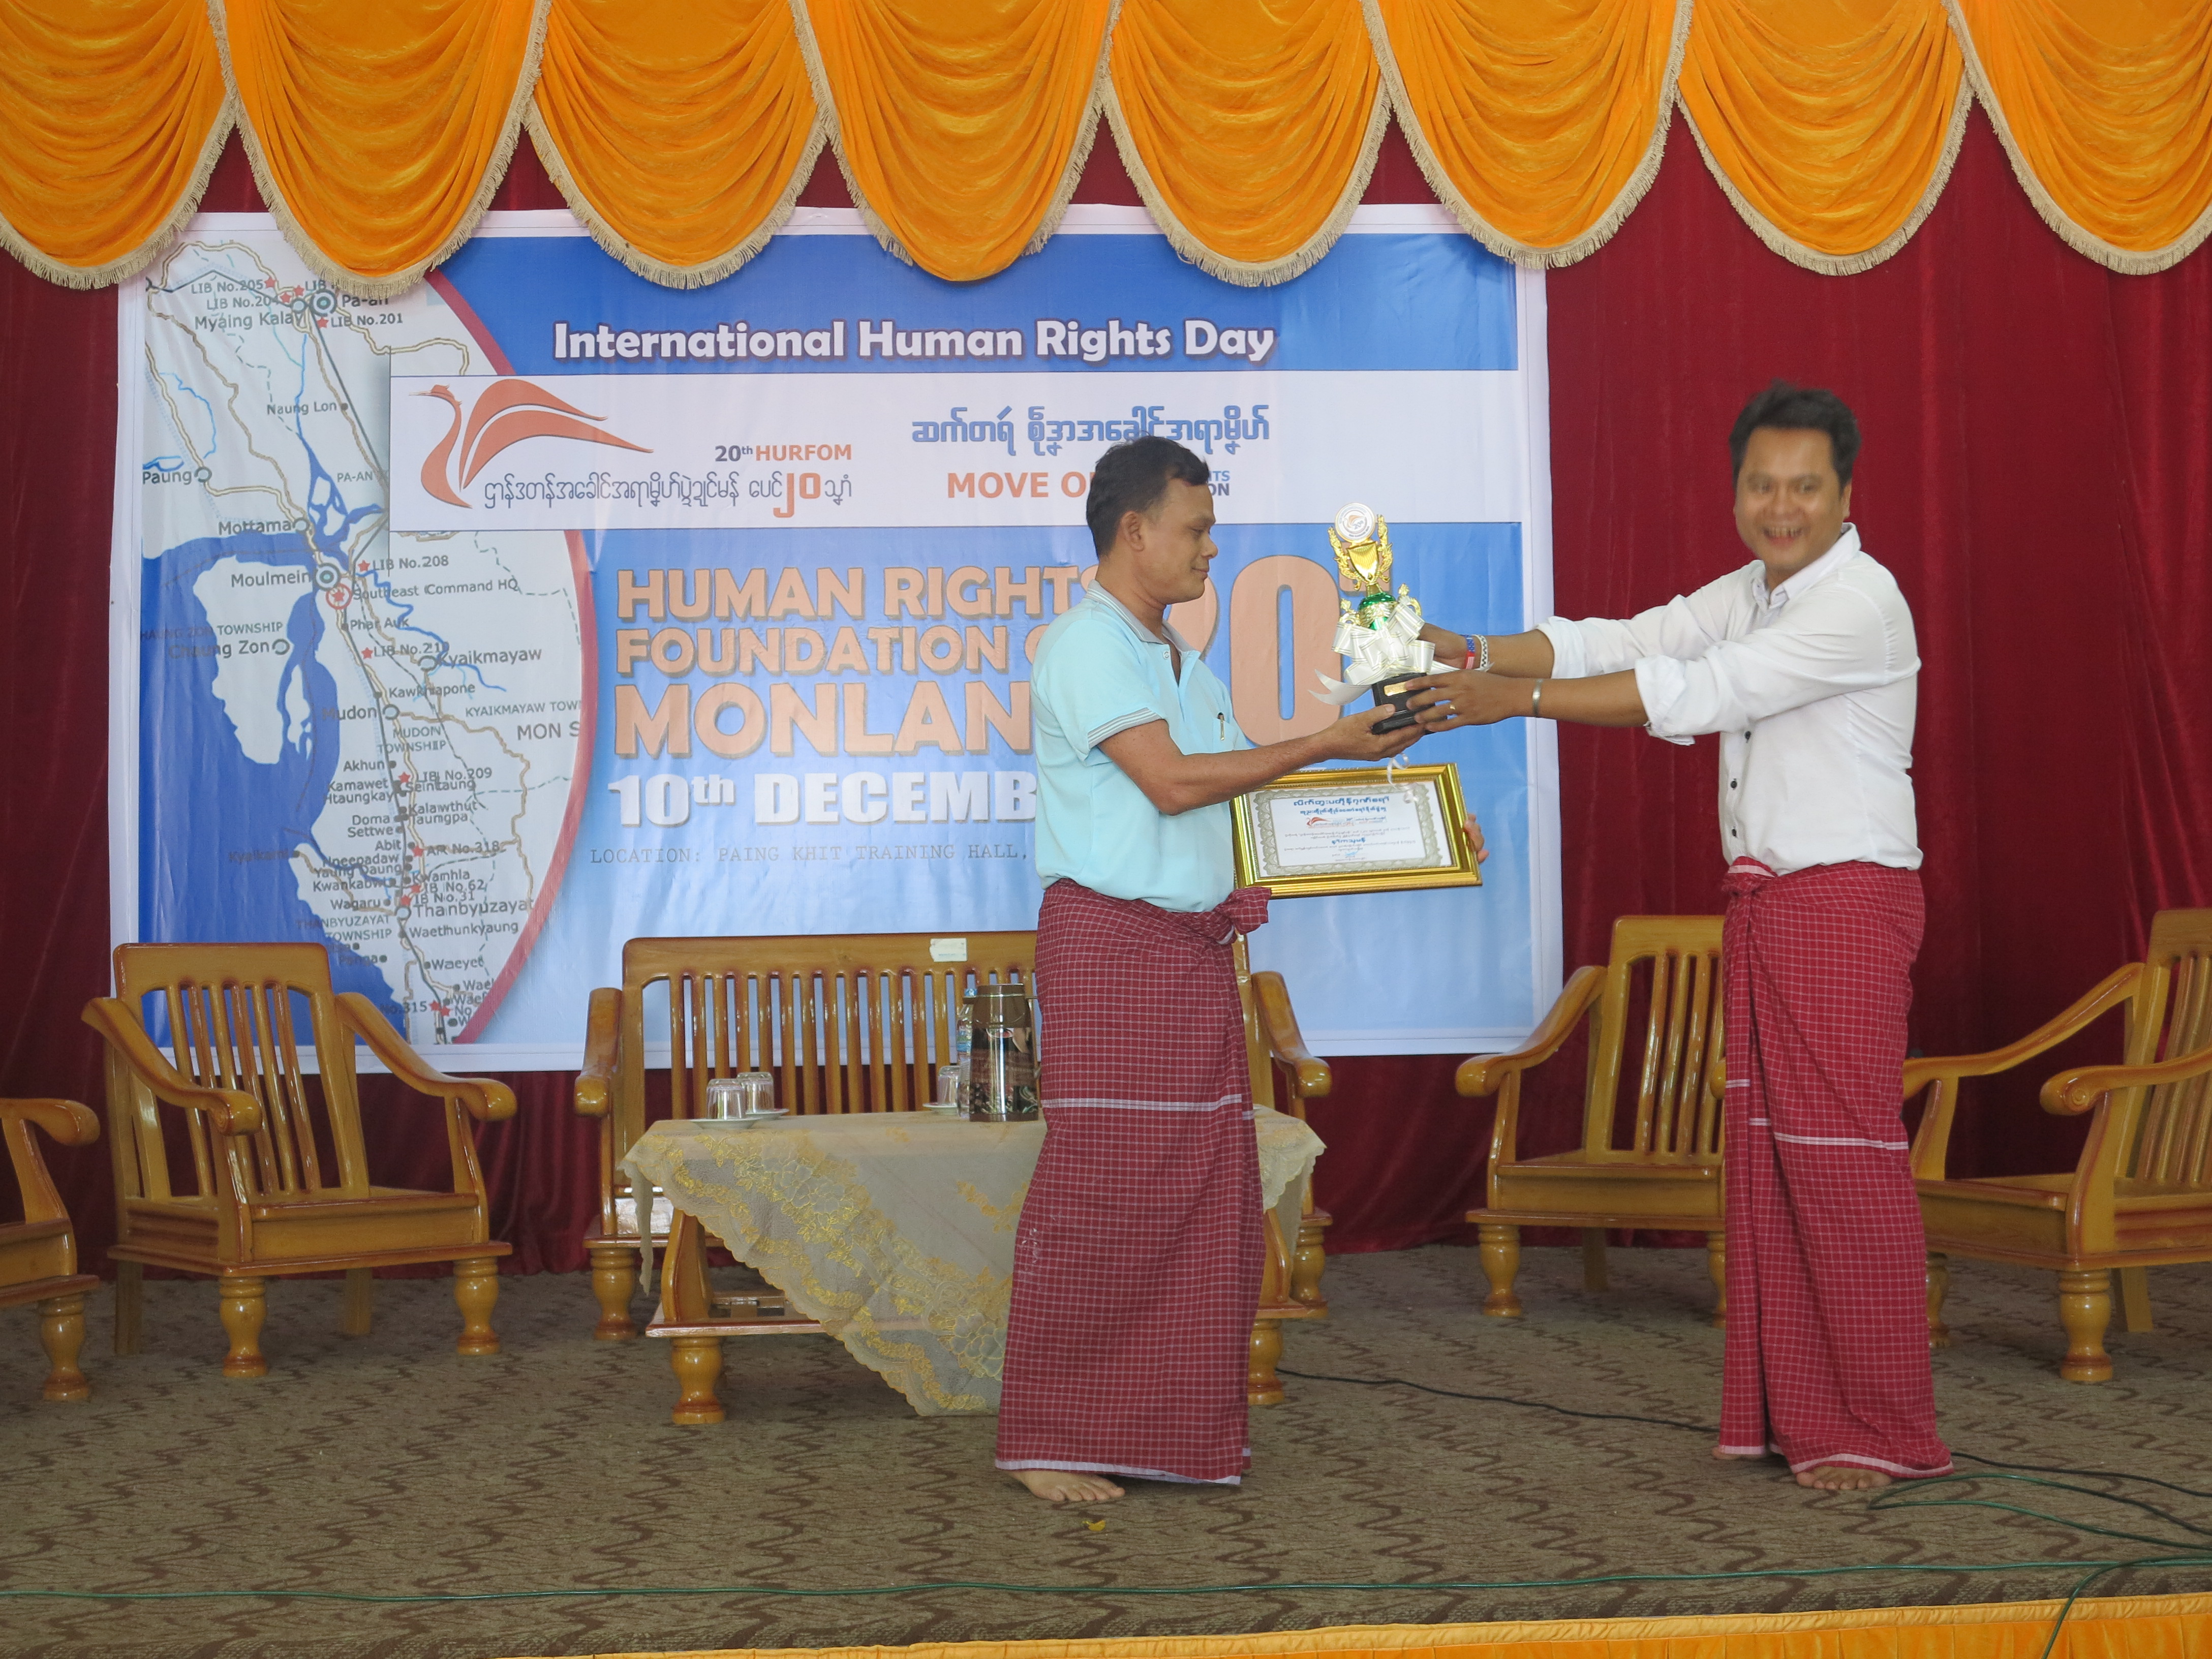 20th anniversary of the Human Rights Foundation of Monland